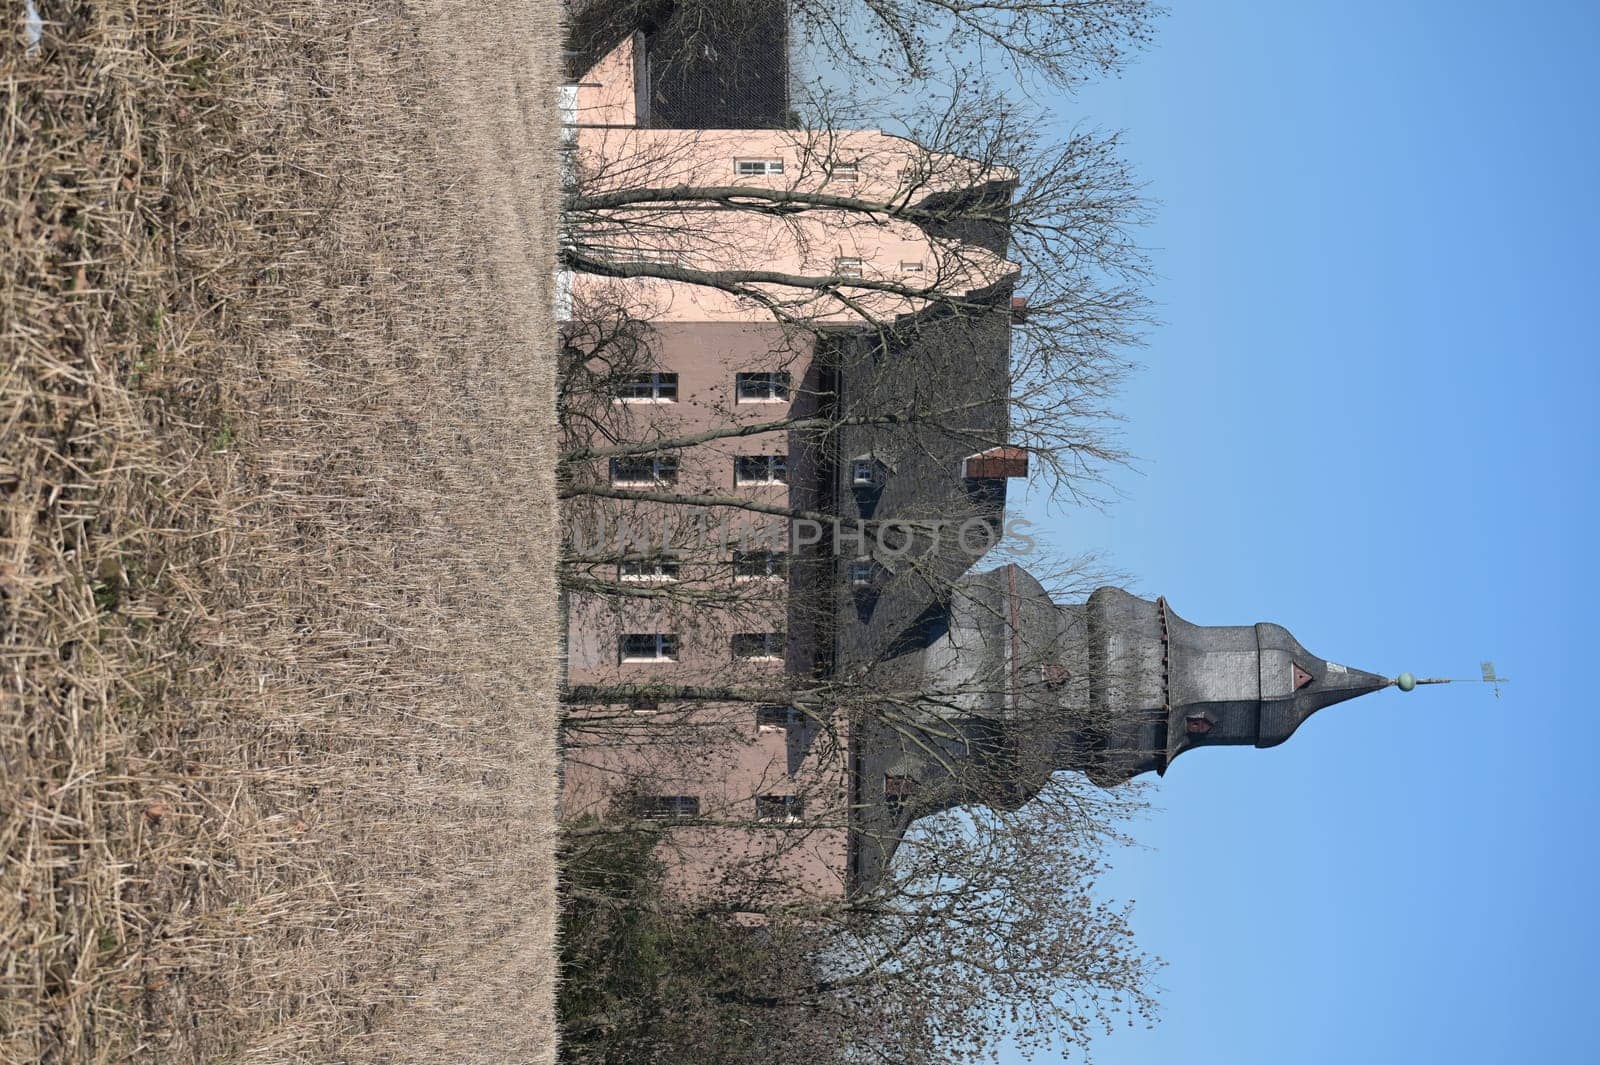 Old manor house with slate tower called Gut Dyckhof in Meerbusch, Germany